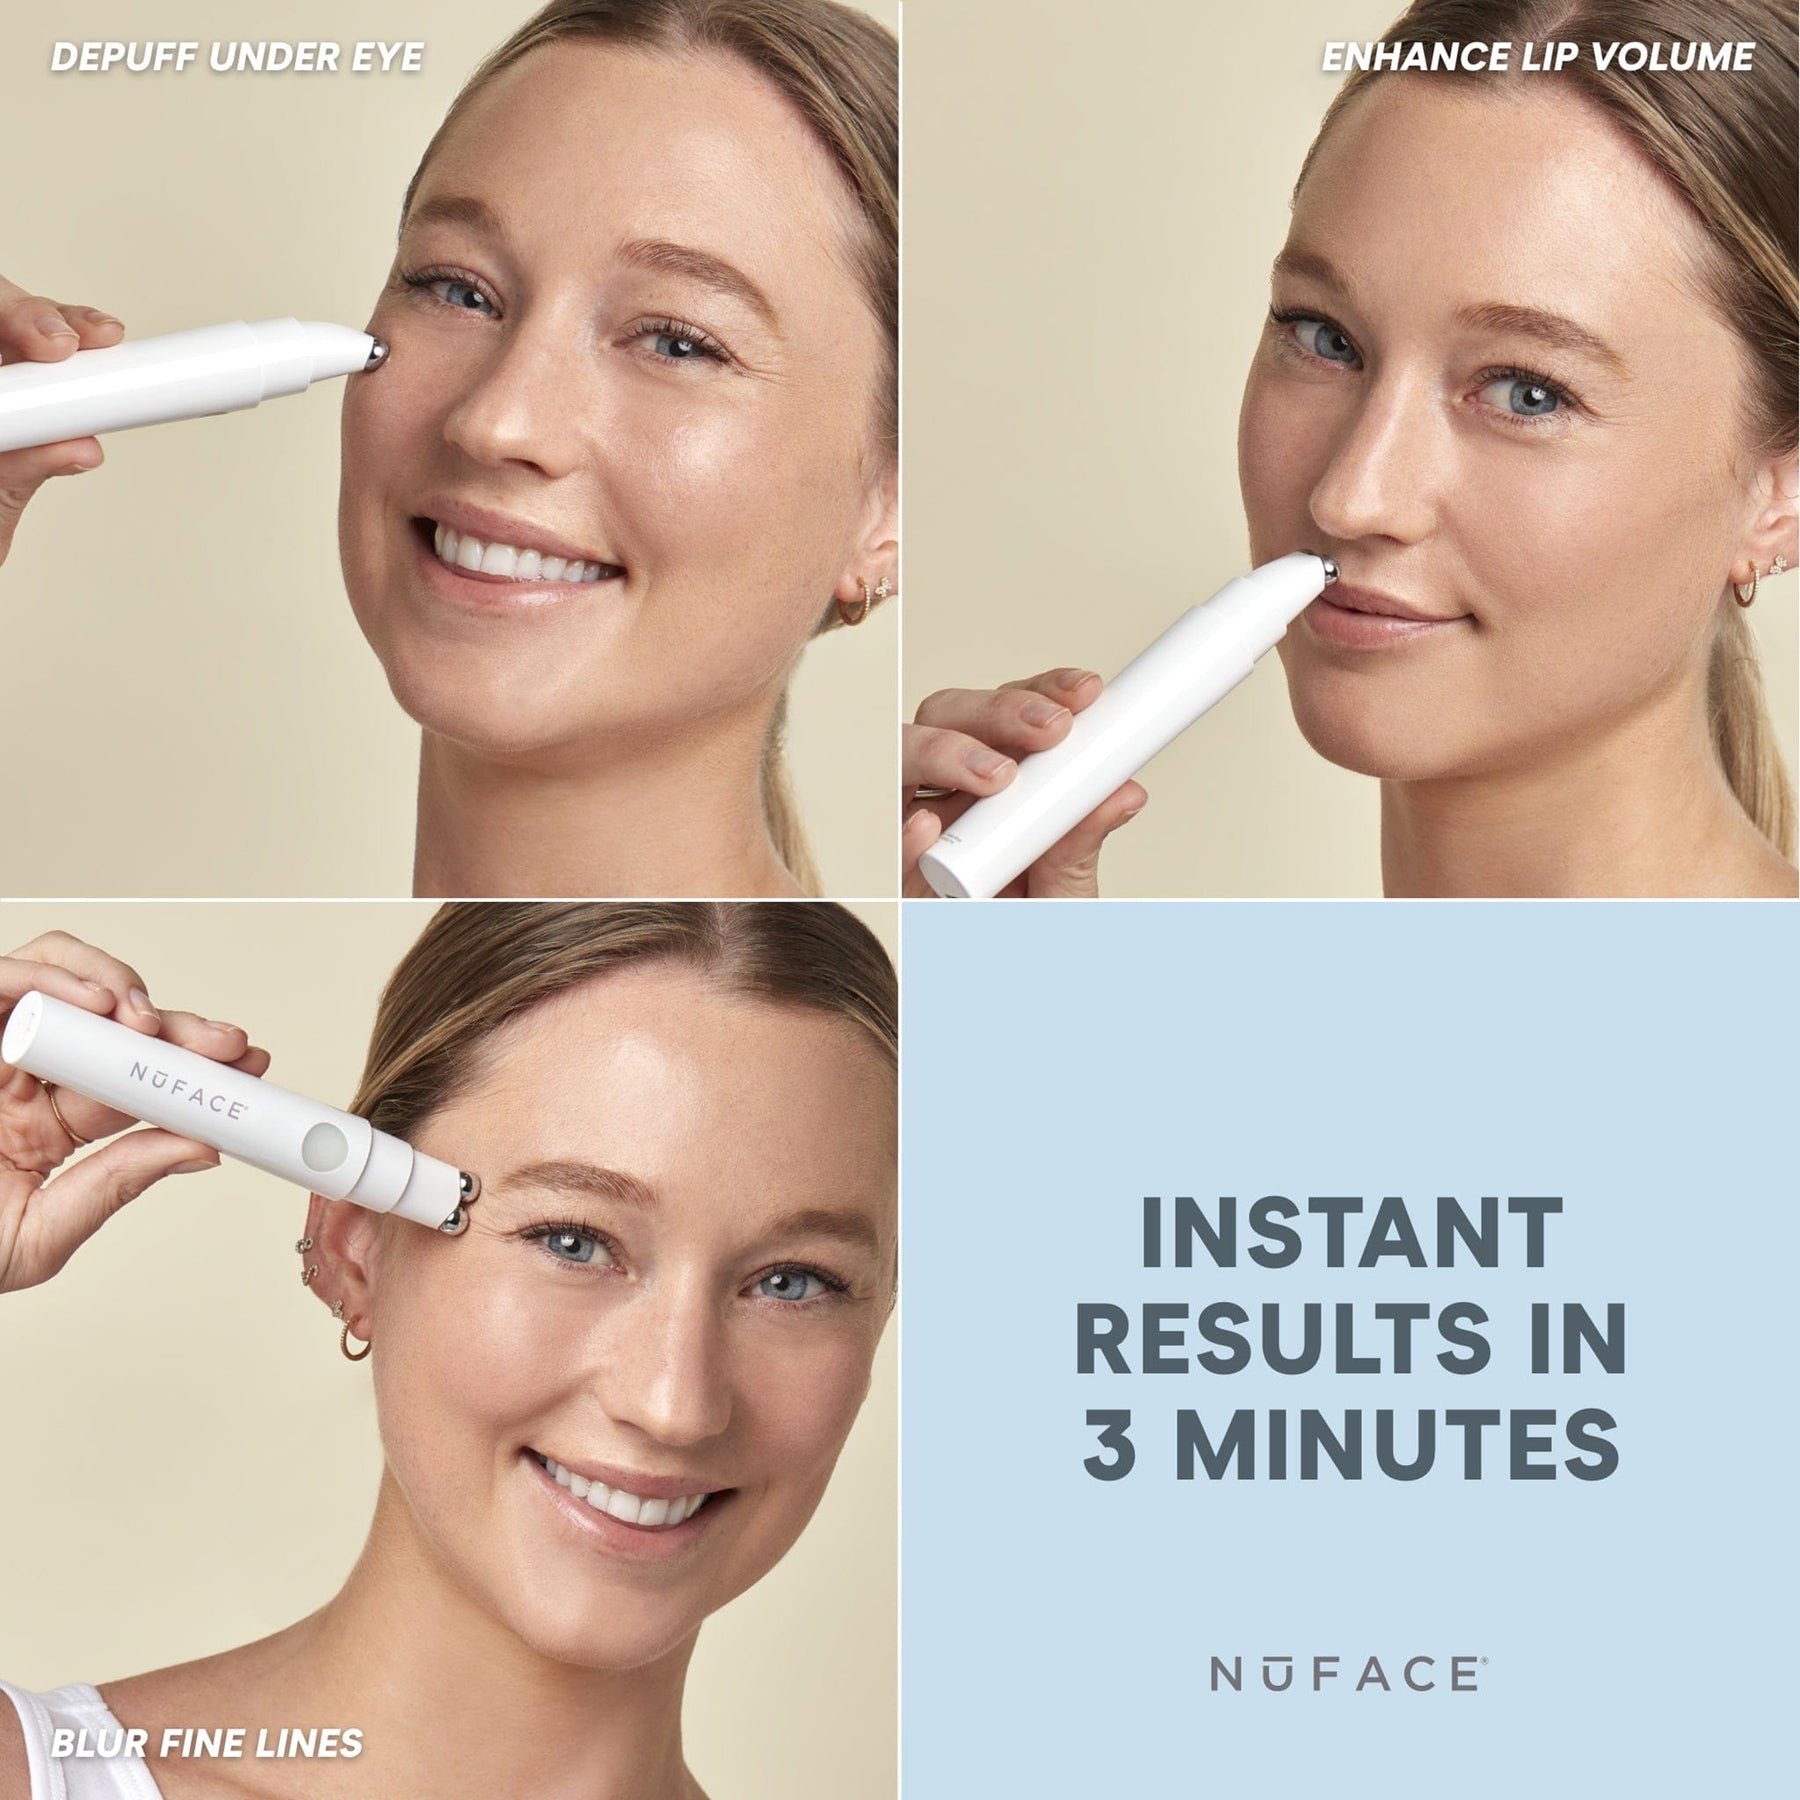 NuFACE FIX Line Smoothing Device + FIX Reviews